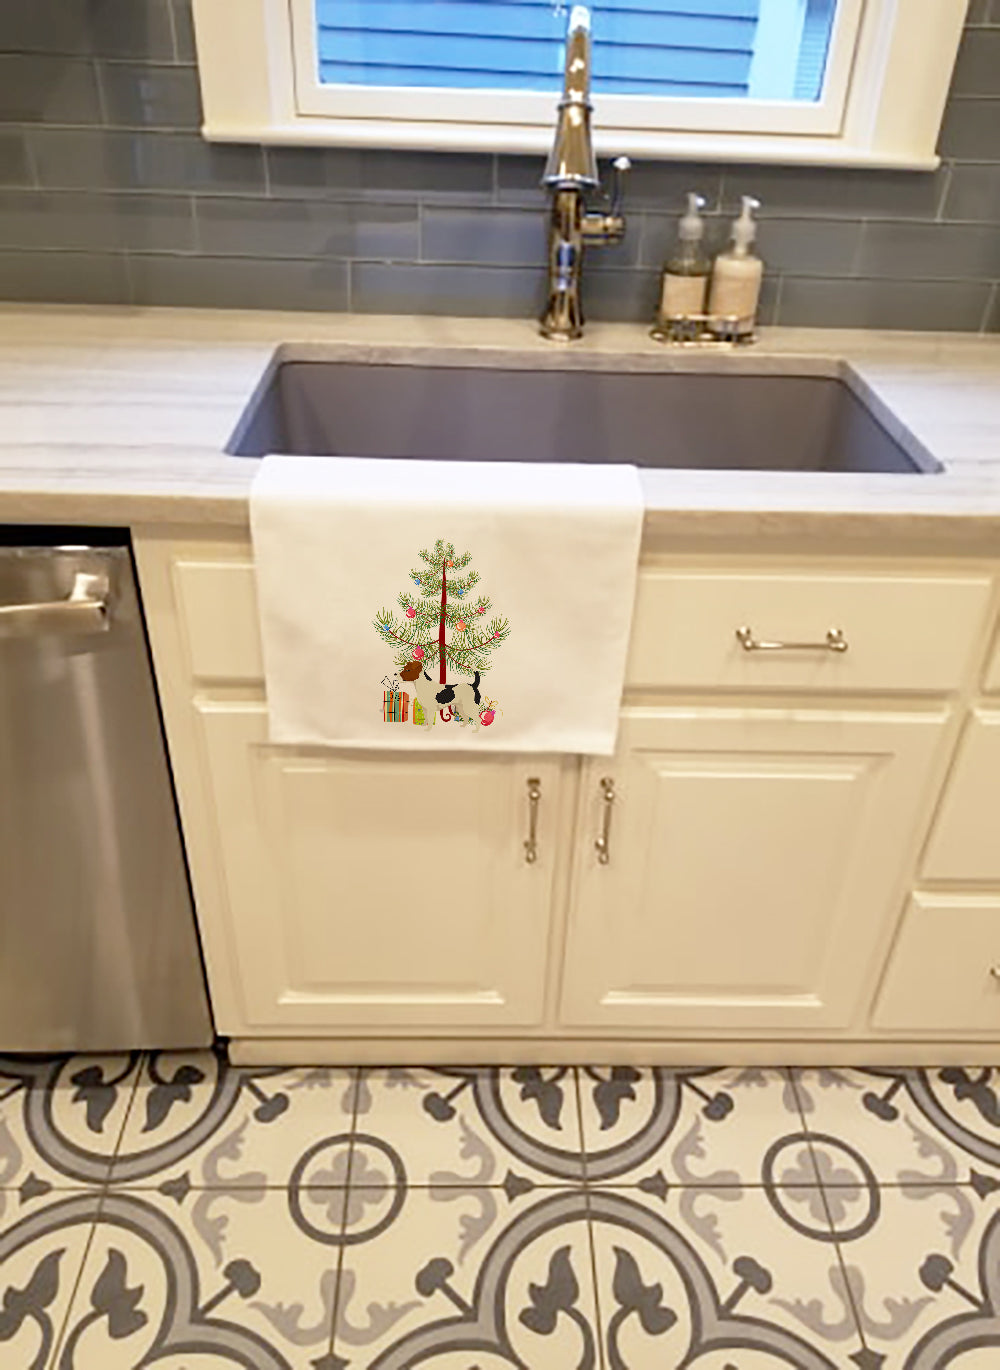 Buy this Jack Russell Terrier Christmas Tree White Kitchen Towel Set of 2